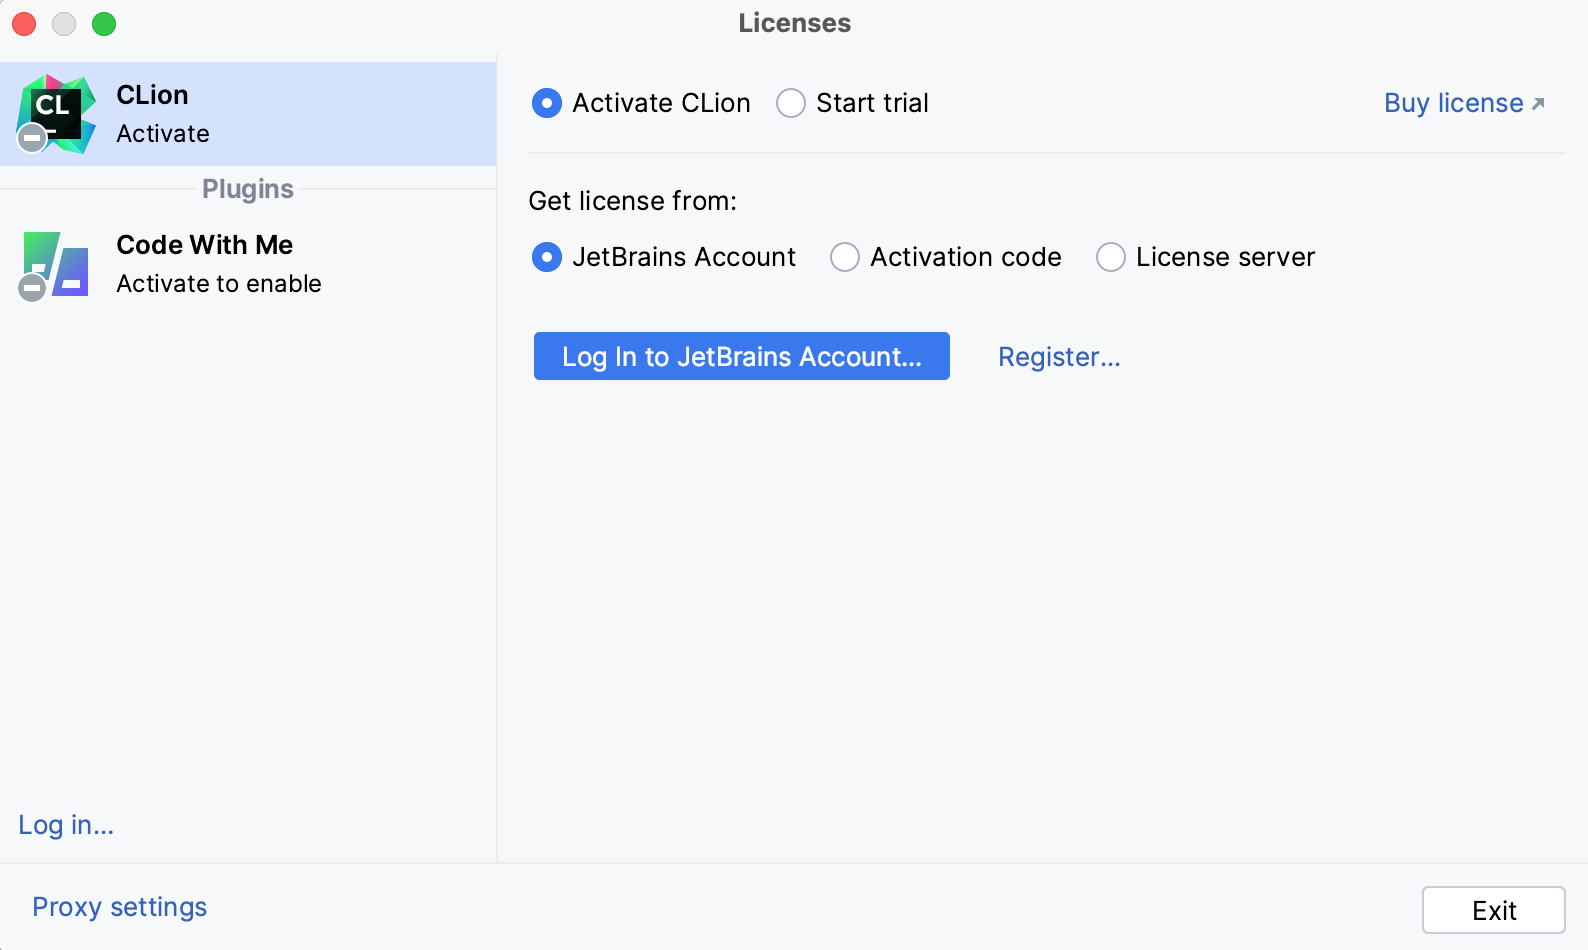 Activate CLion license with a JB Account